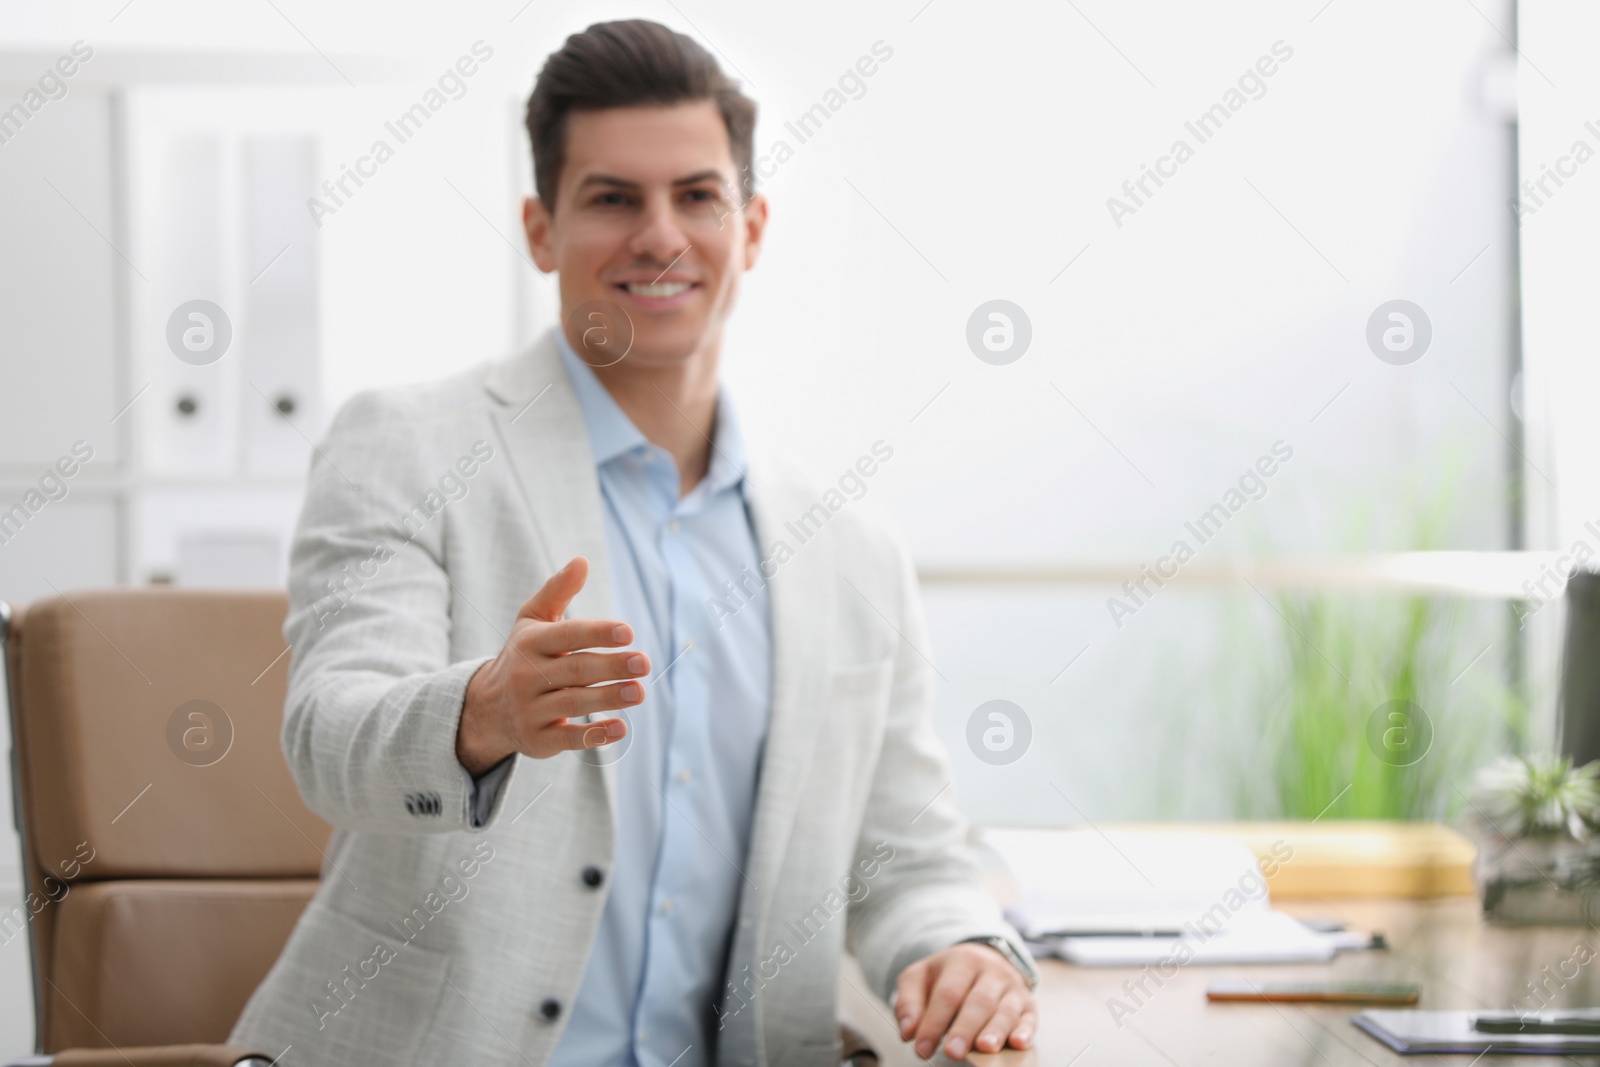 Photo of Businessman offering handshake in office, focus on hand. Space for text